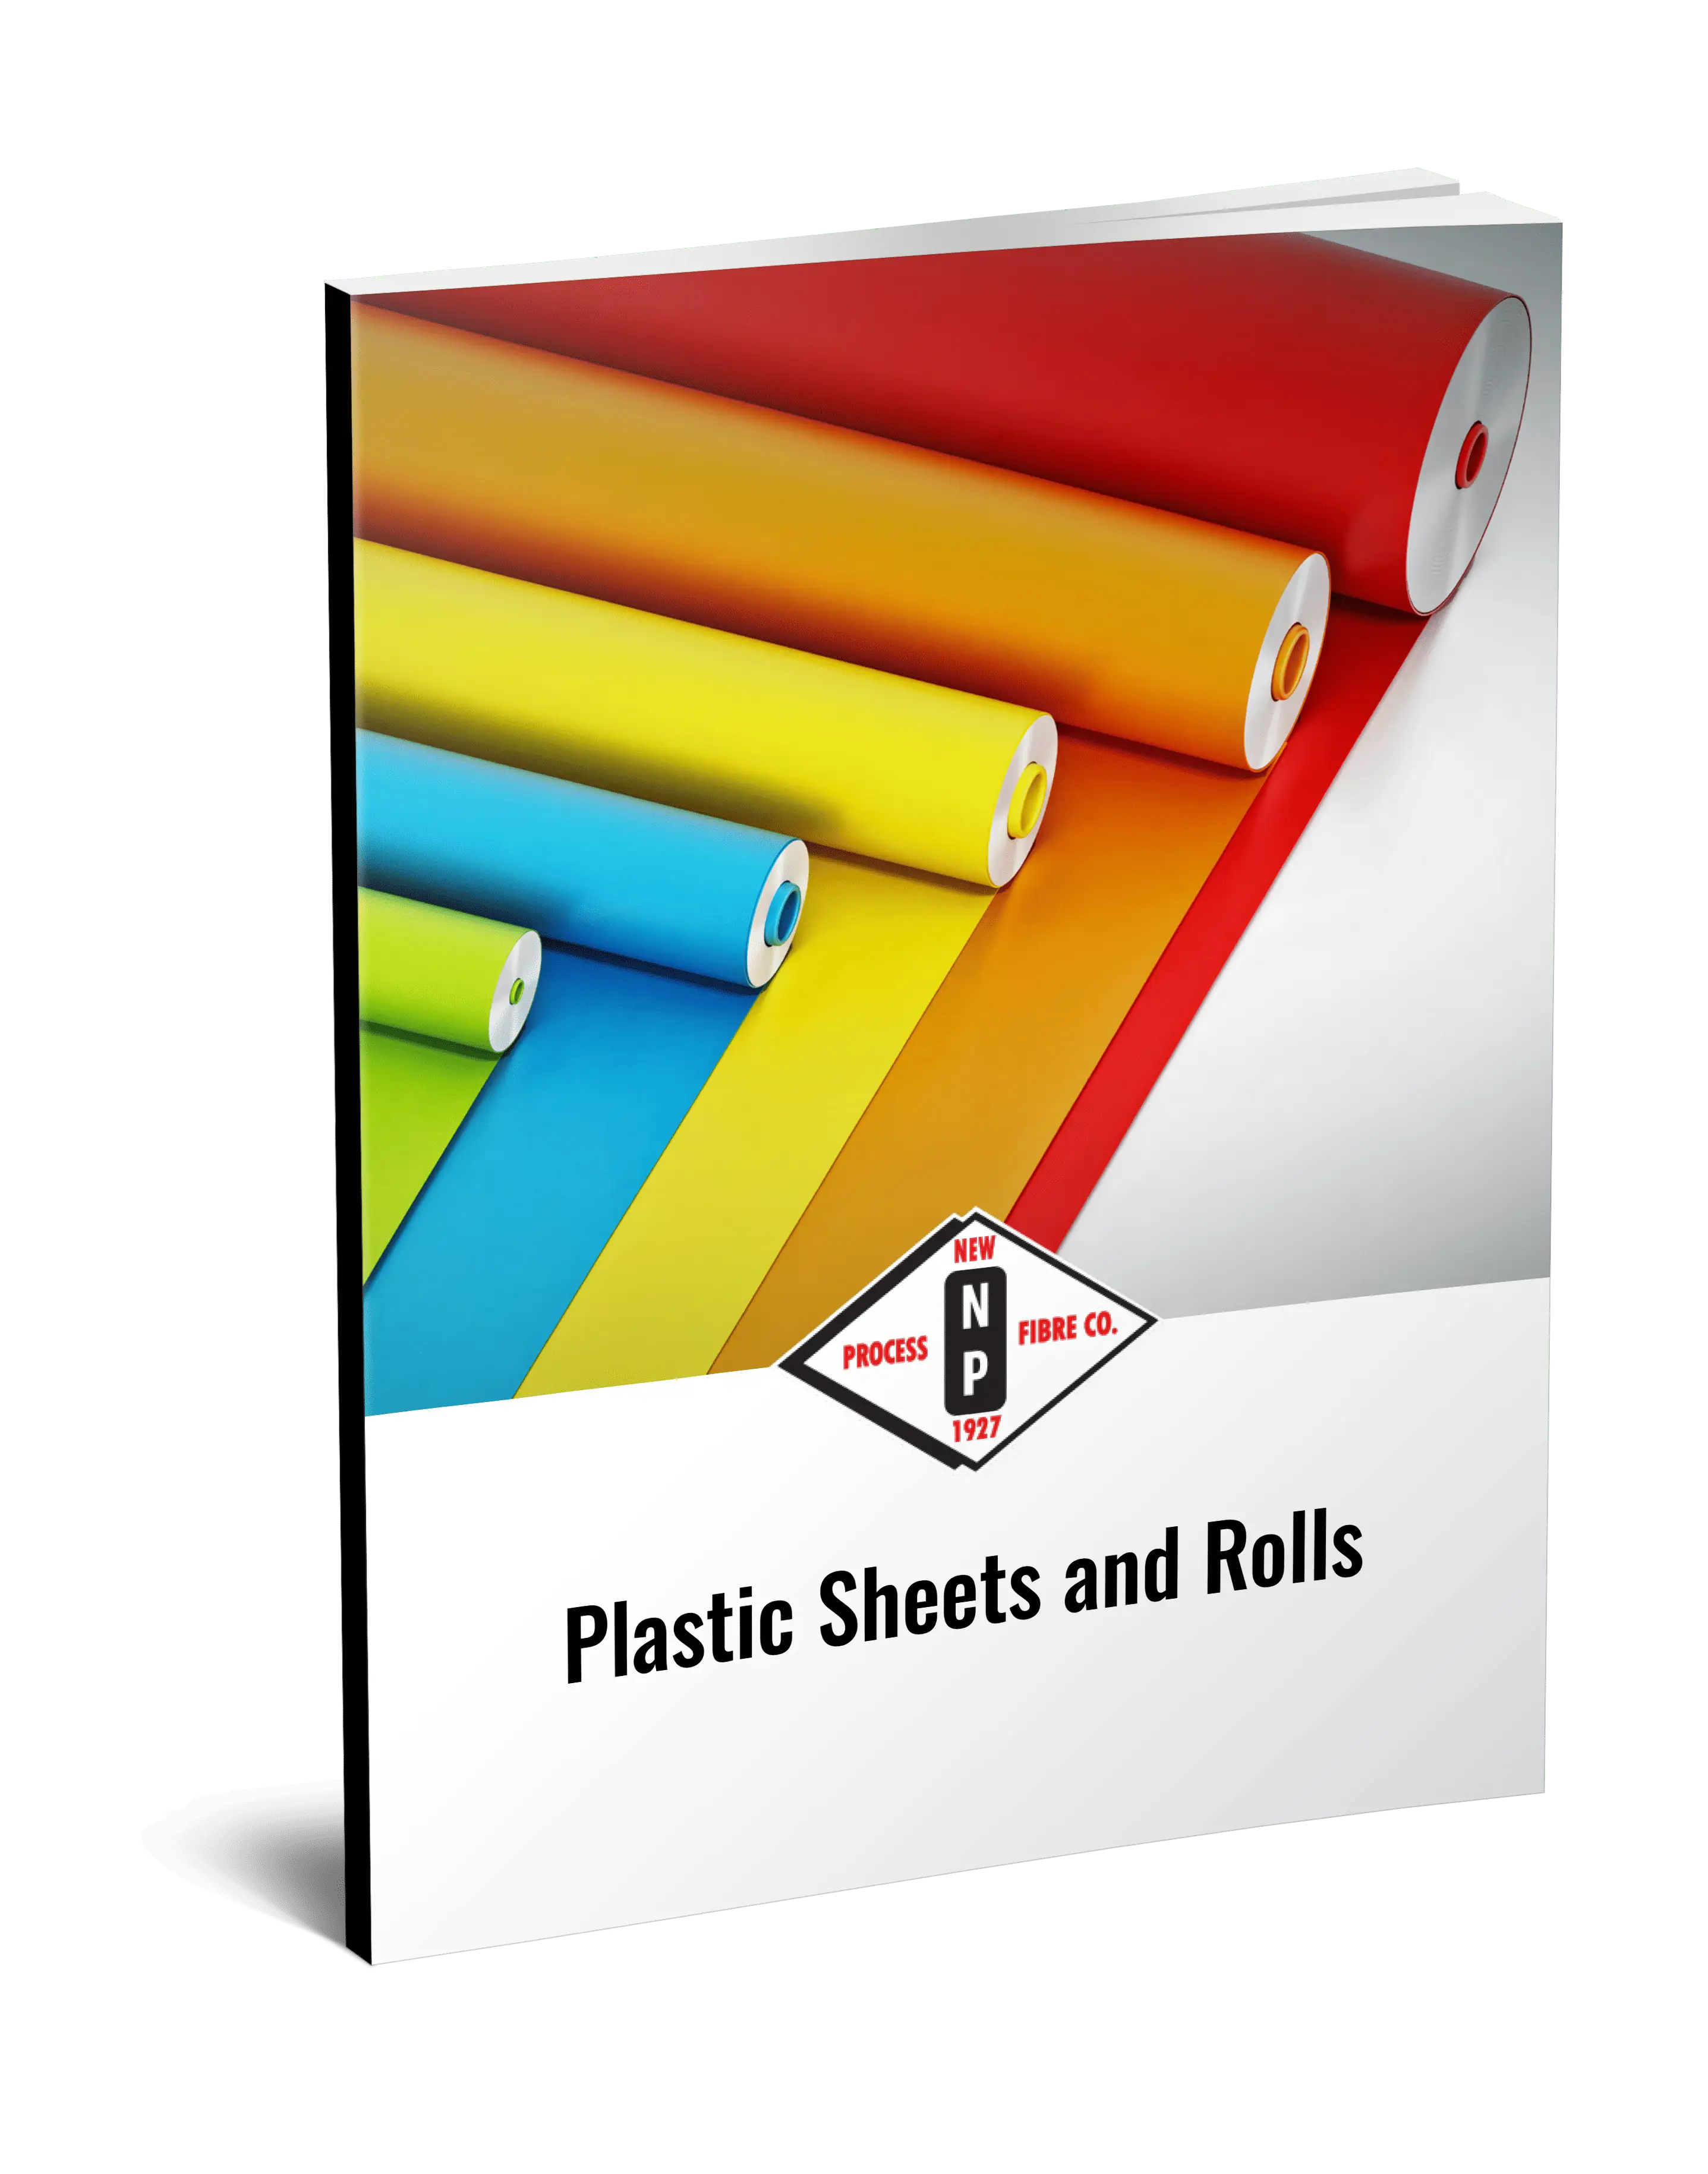 Plastic Sheets and Rolls